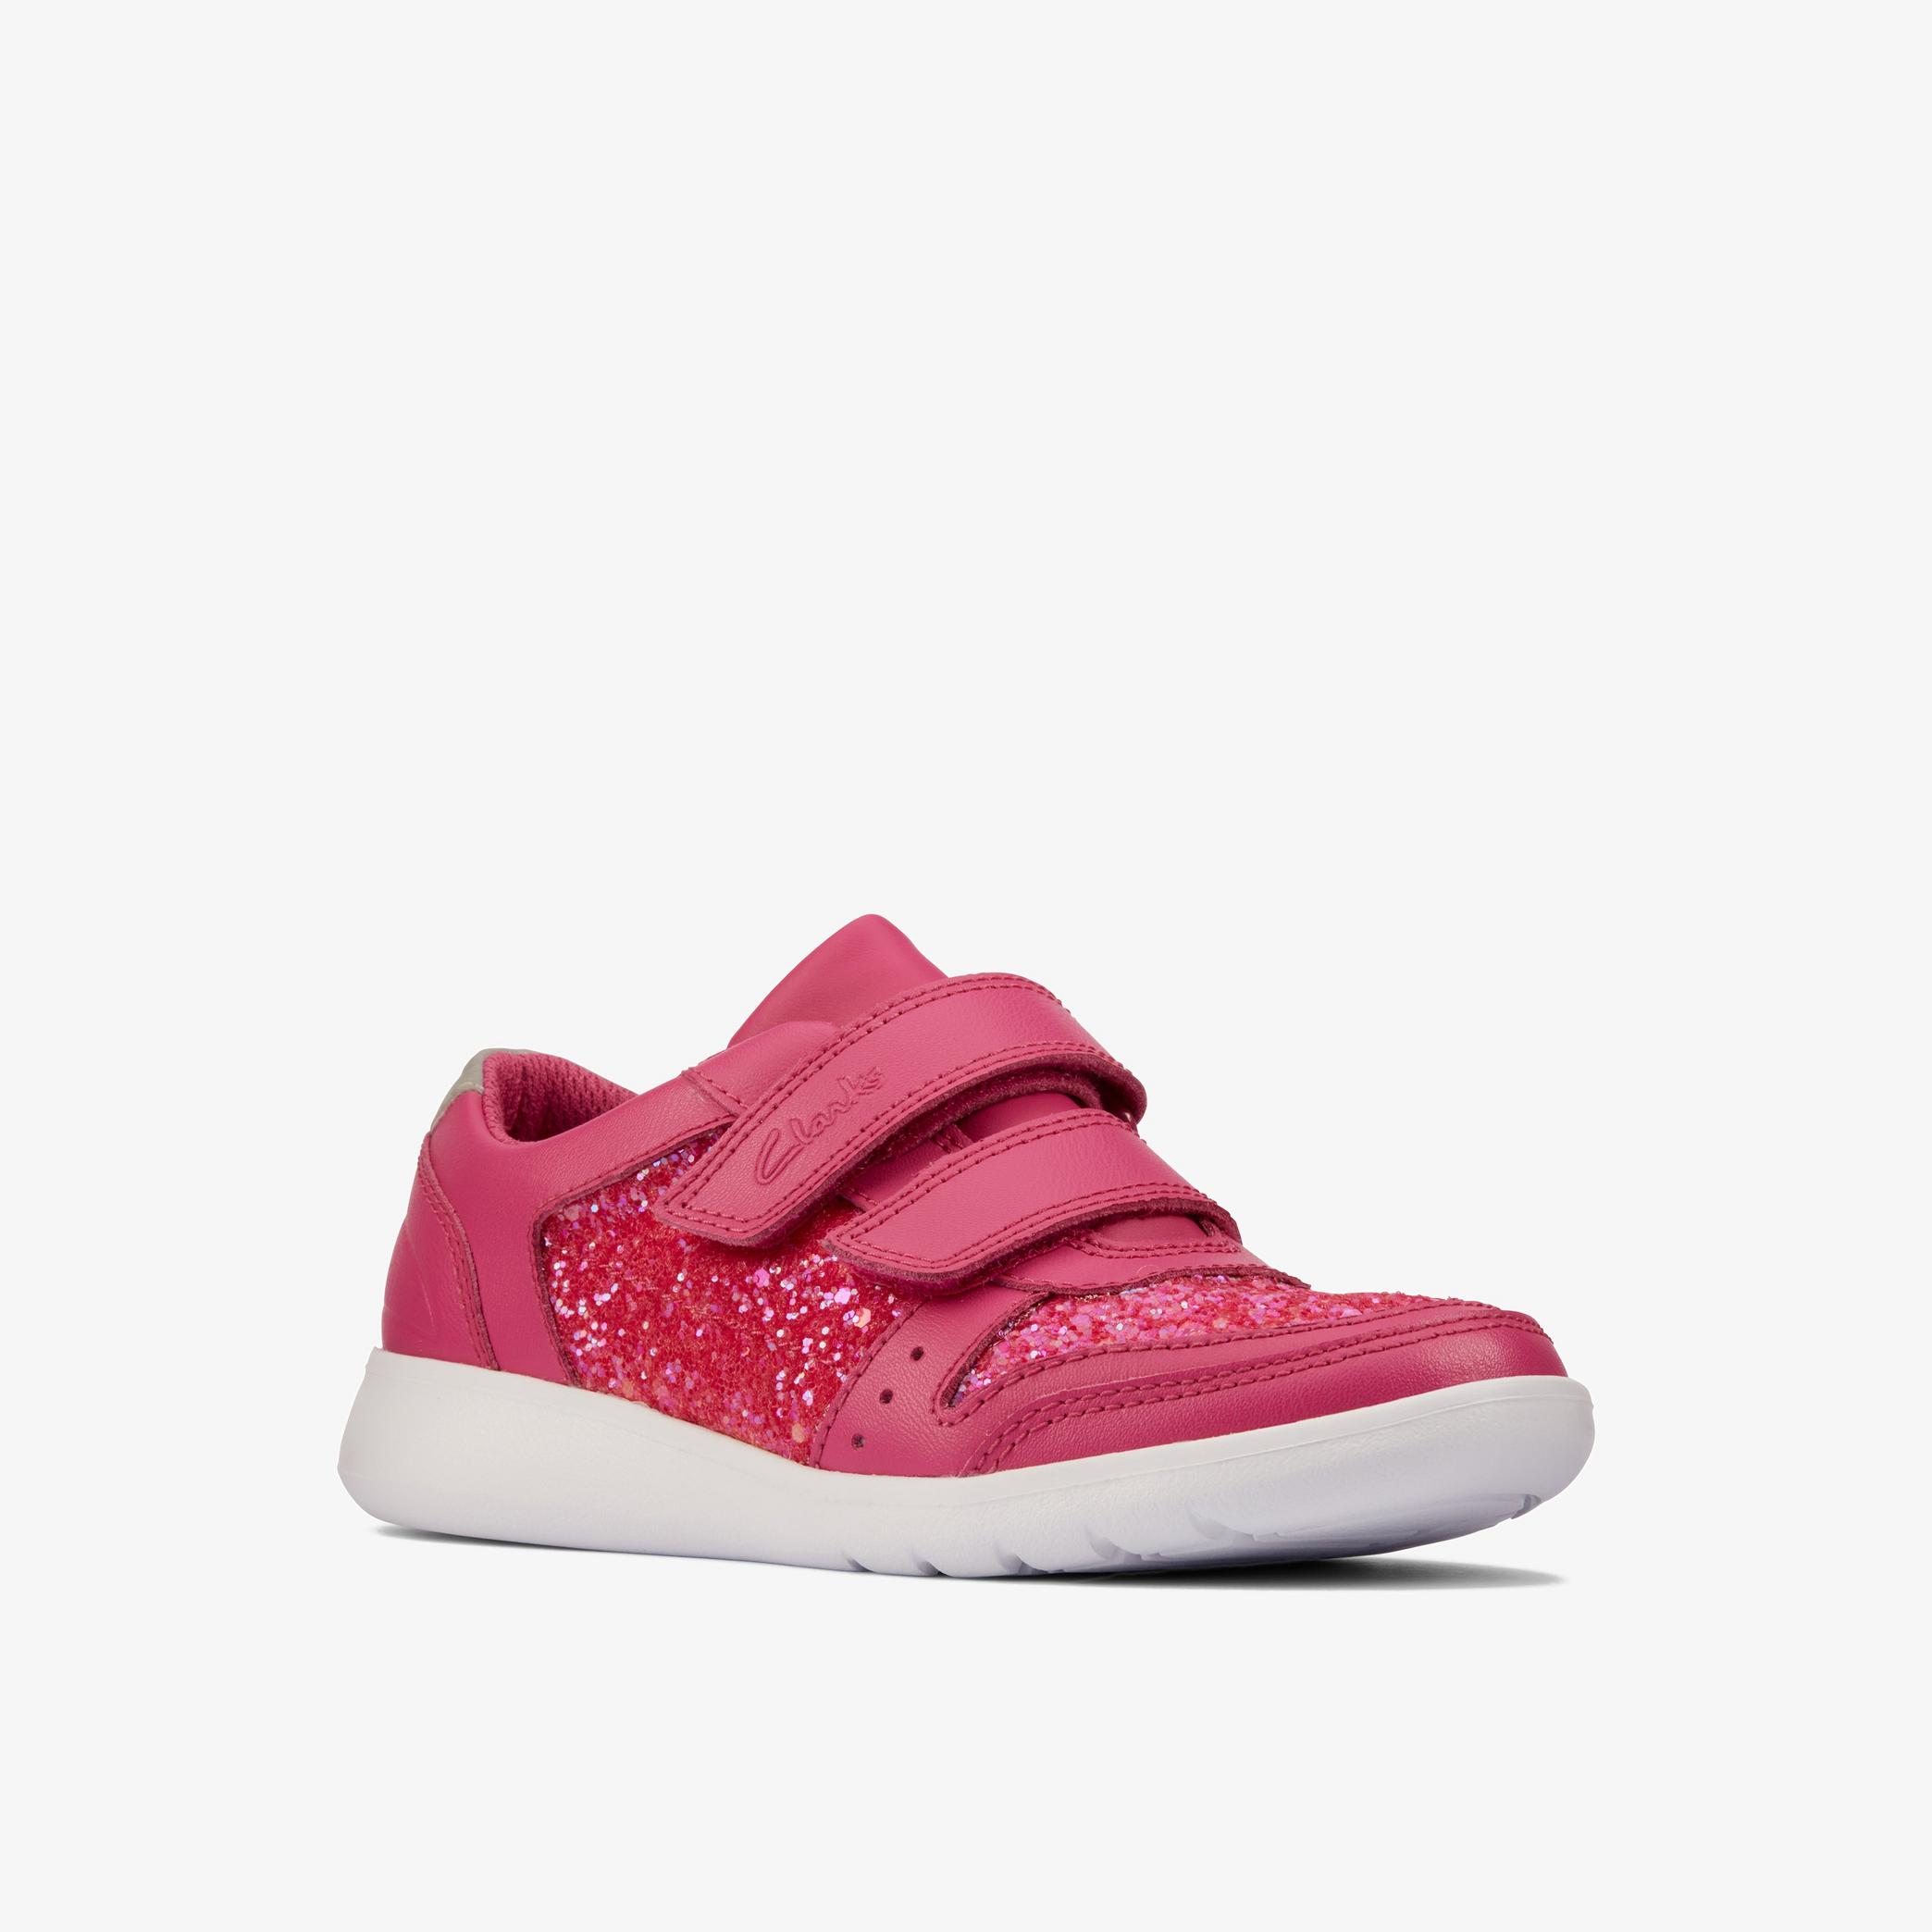 Scape Spirit Kid Lipstick Pink Leather Shoes, view 3 of 6